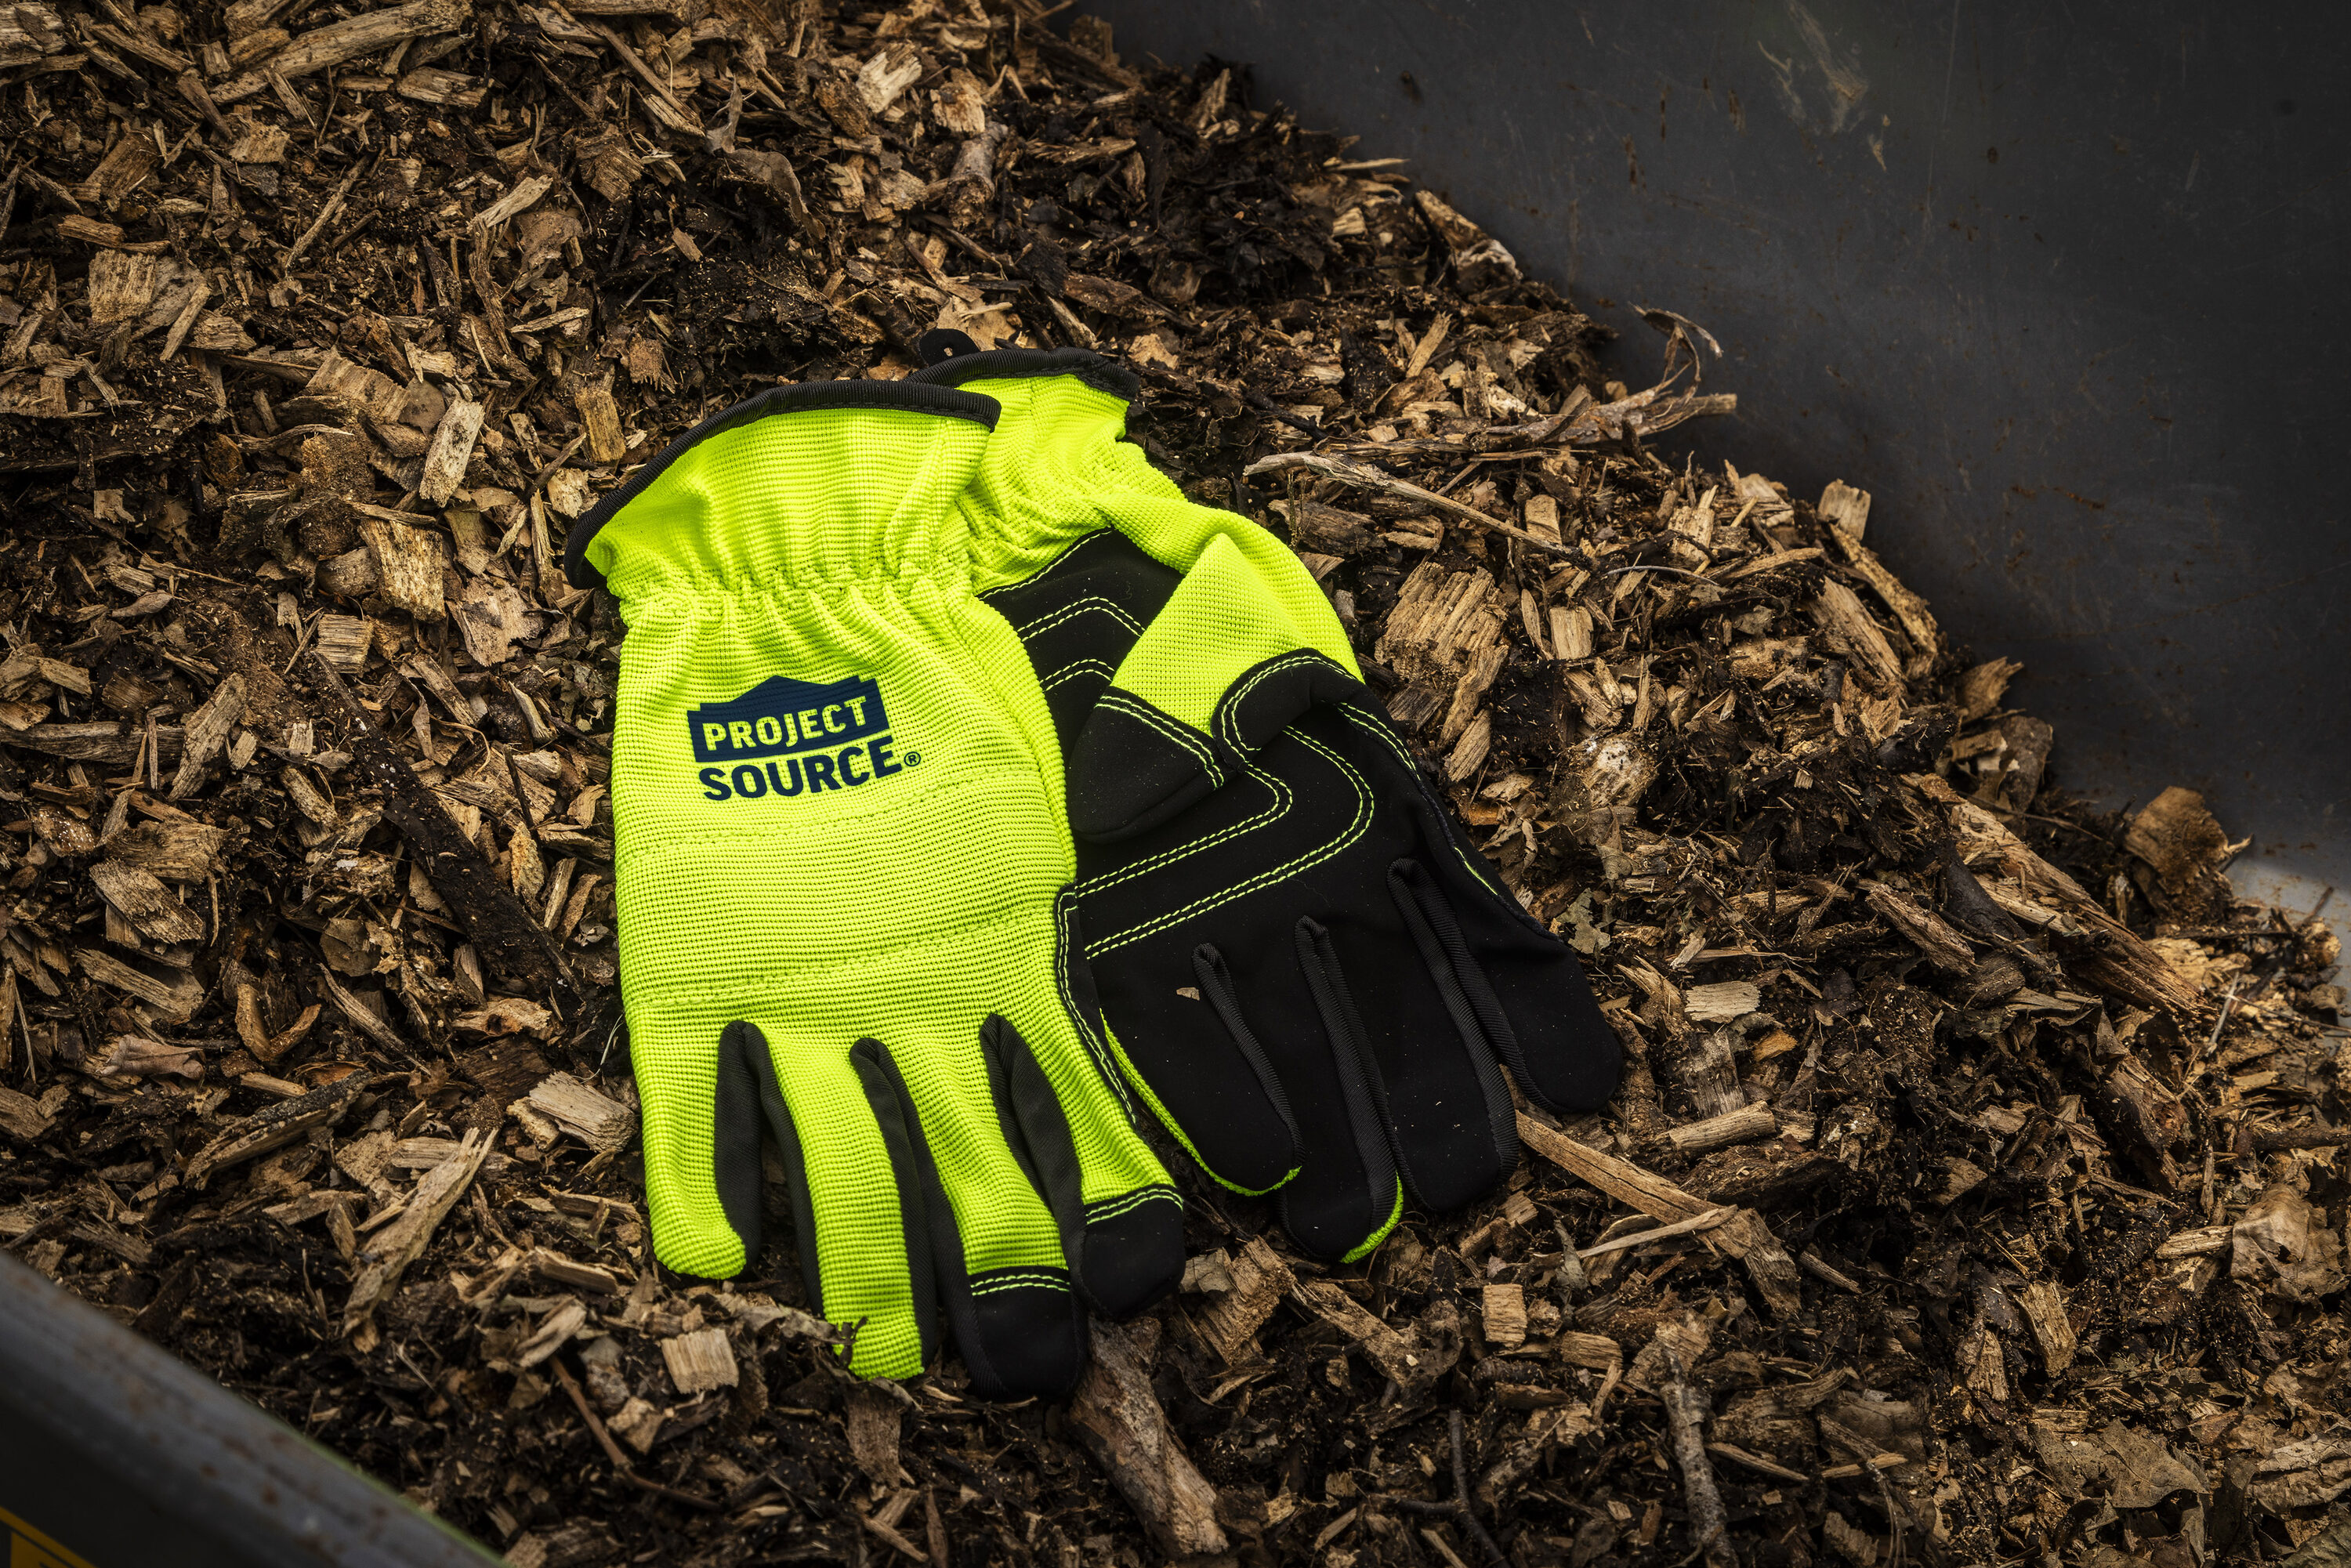 AllOutdoor Review: Gorilla Grip Cut Protection Gloves